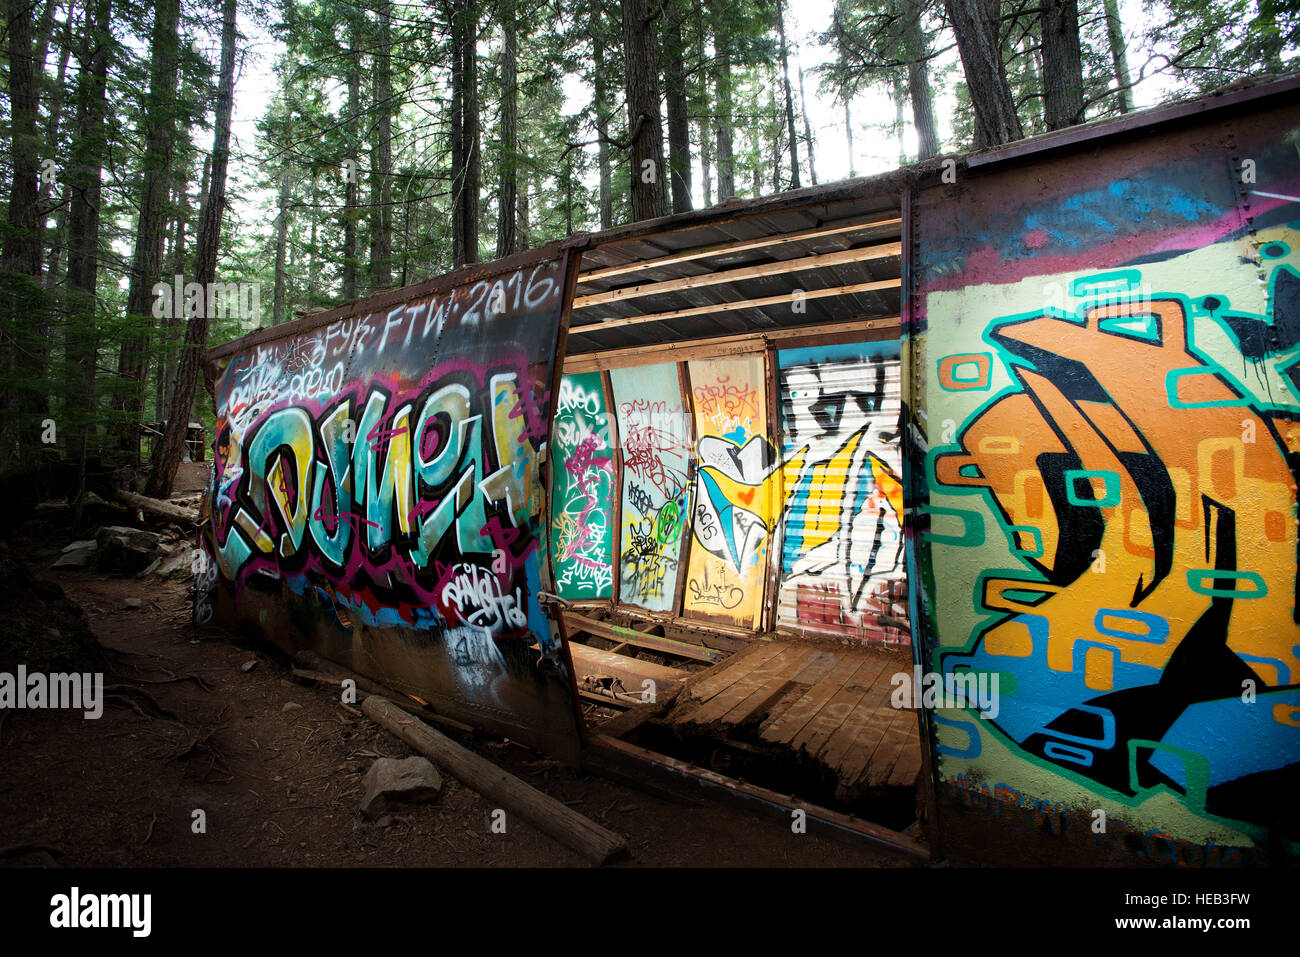 The Train Wreck trail.  The wrecked box cars left over from a 1950's PGE railway derailment, now a popular spot for local graffiti artists. Stock Photo